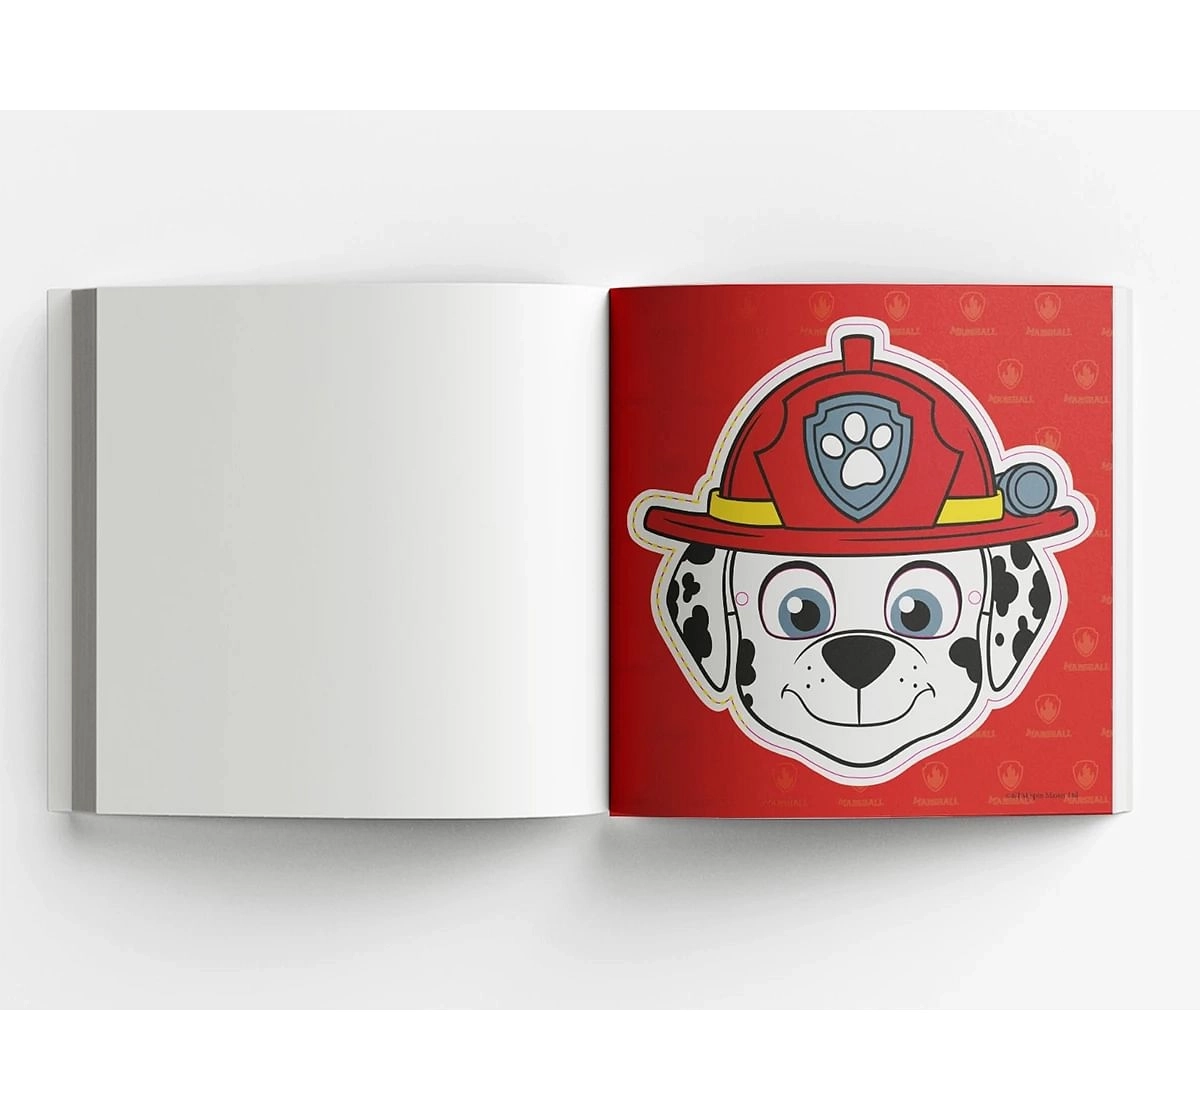 Wonder House Books Paw Patrol Put On Your Mask and Turn Into A Super Hero Book for kids 3Y+, Multicolour